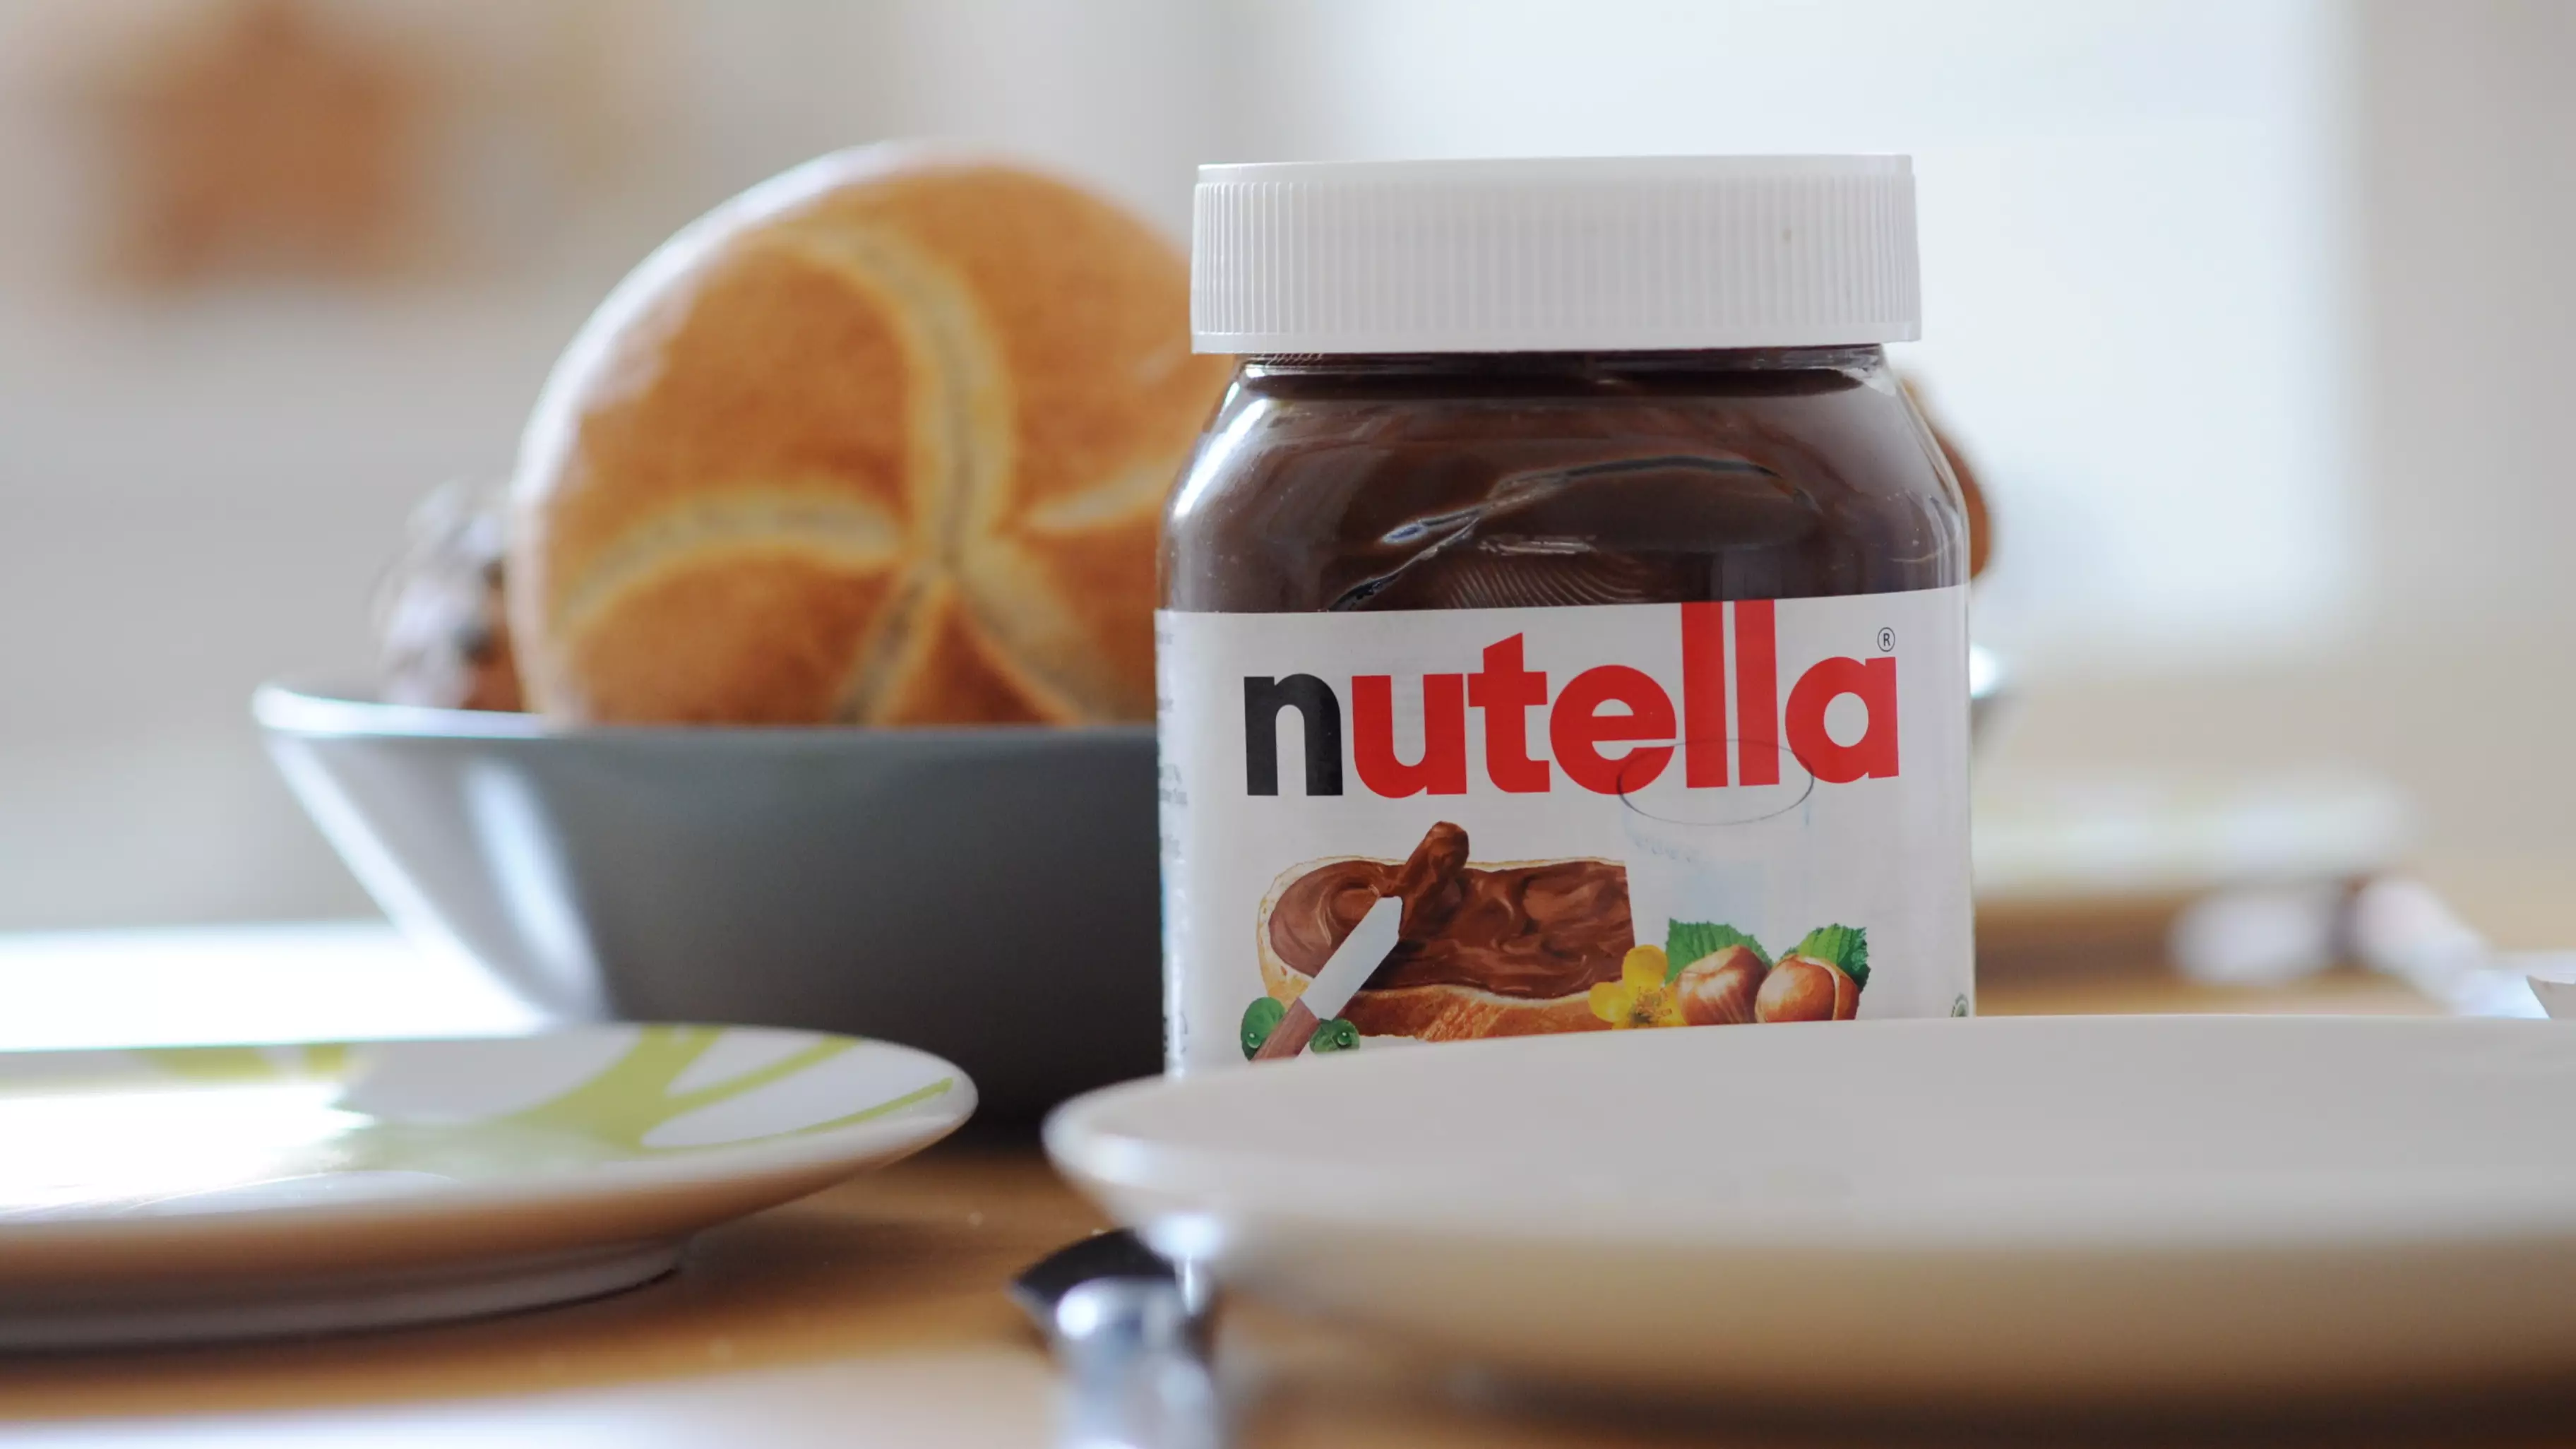 Nutella Is Looking For Taste Testers At Its Factory In Italy